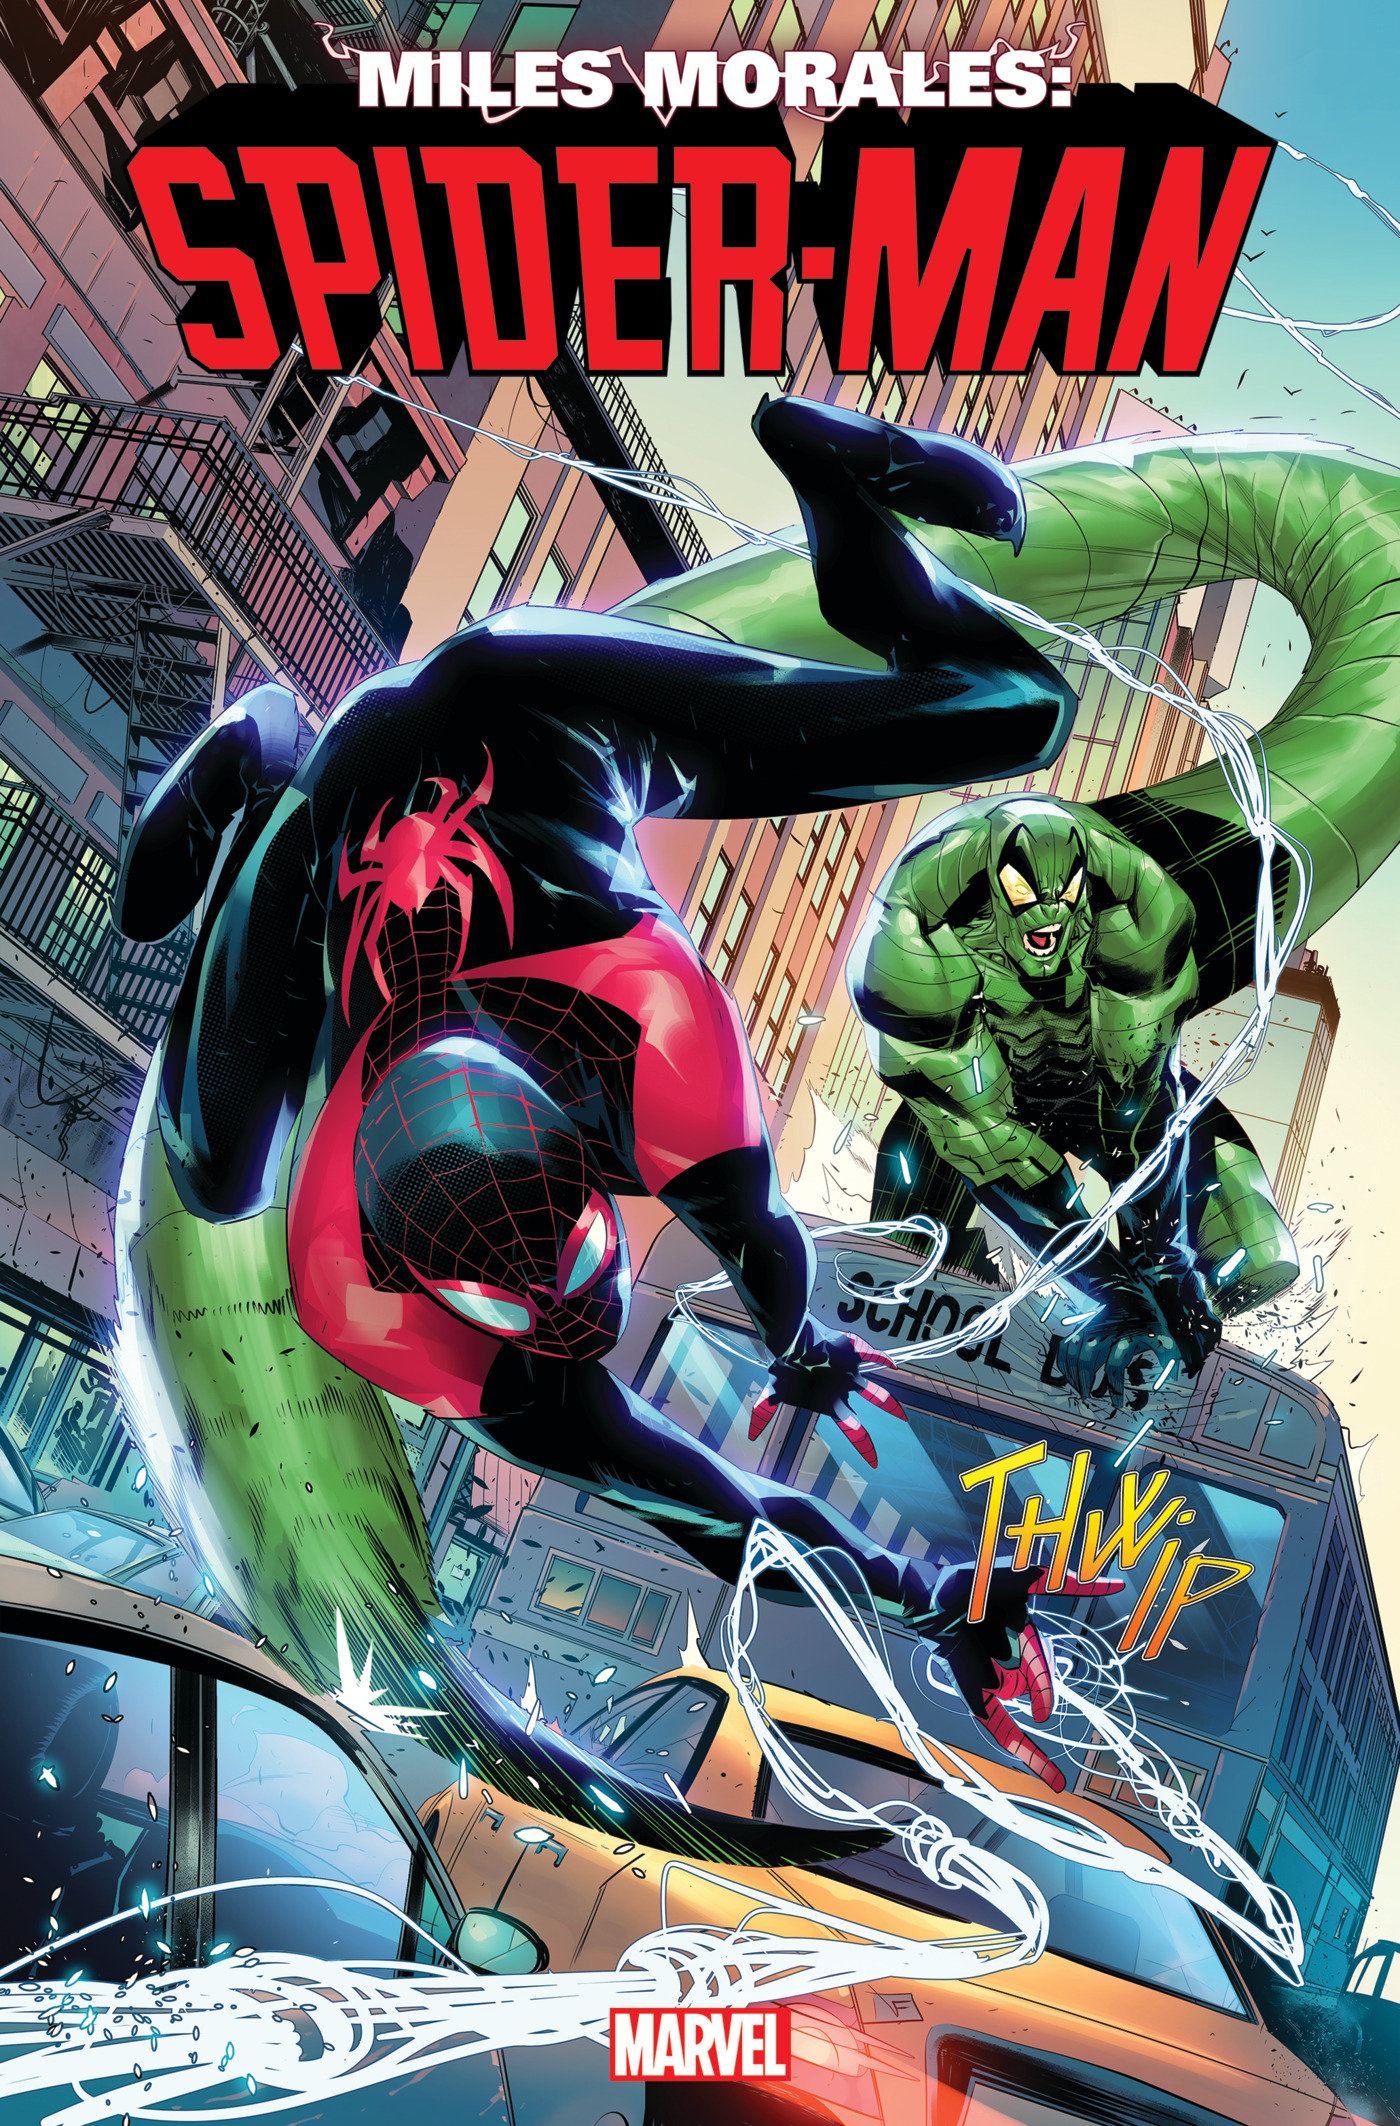 Miles Morales: Spider-Man #1 1 for 25 Incentive Vicentini Variant